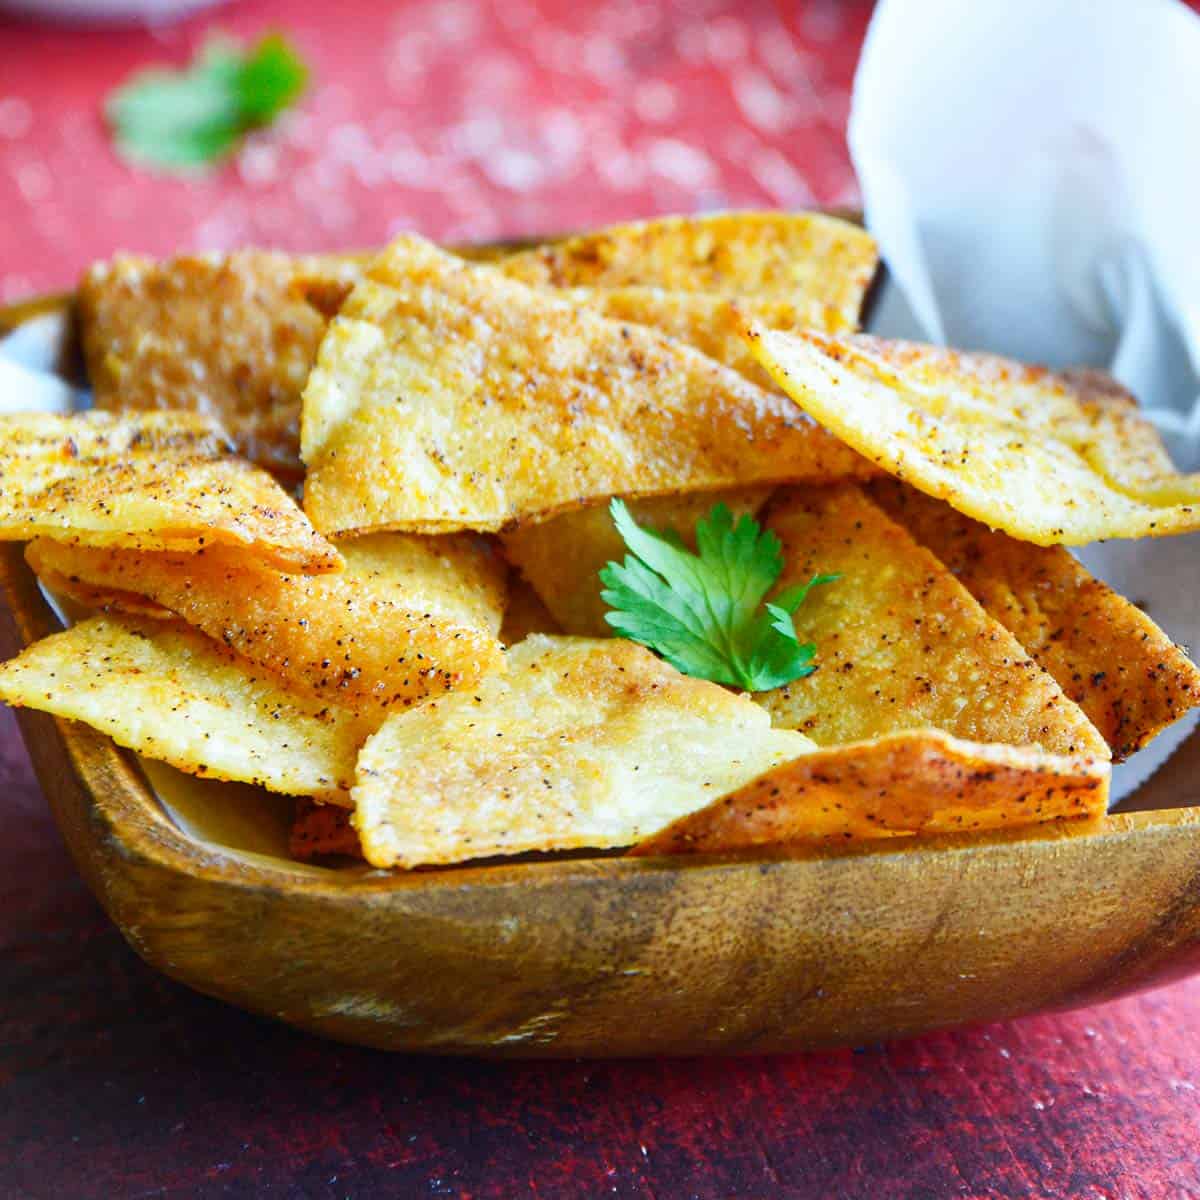 Bowl of chipotle tortilla chips